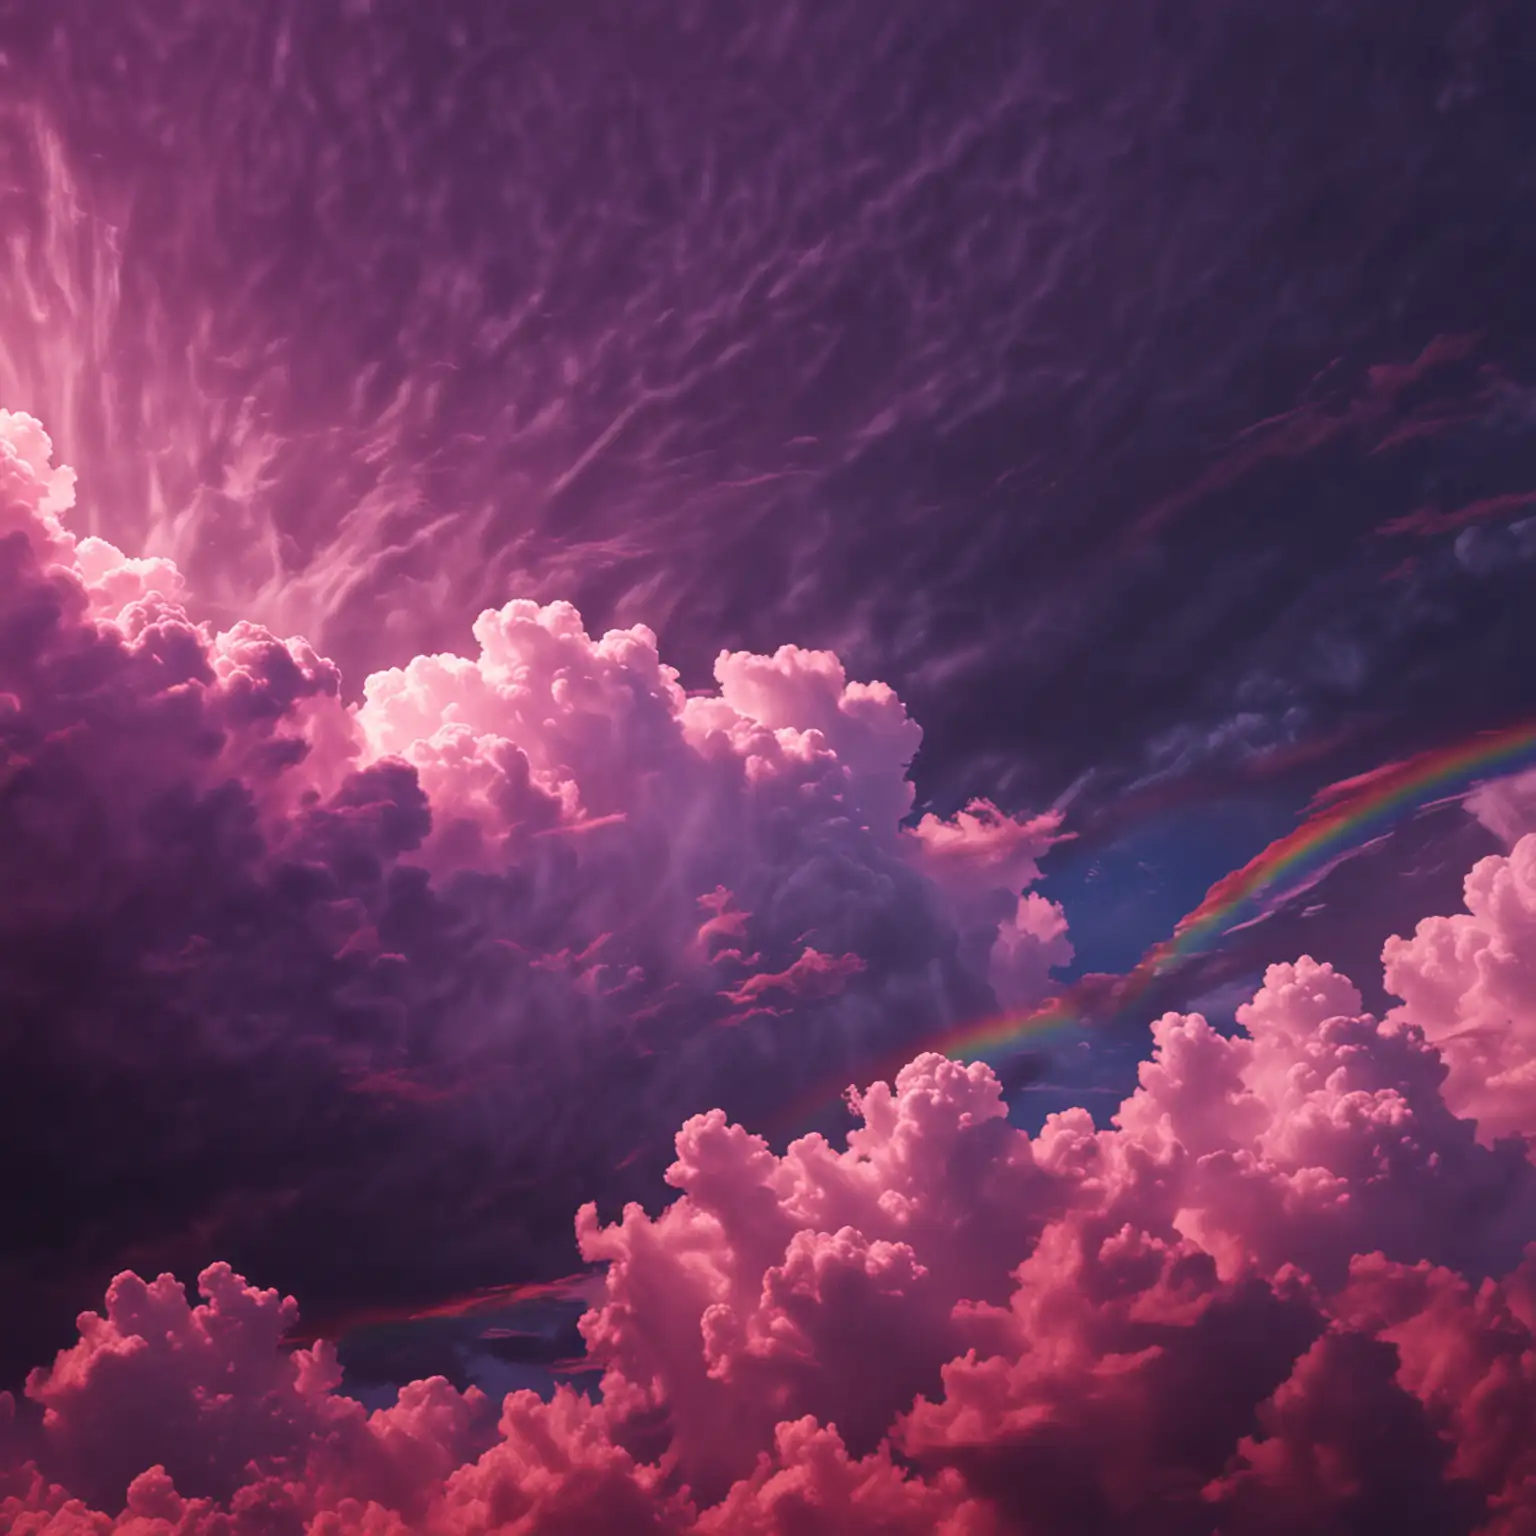 Vibrant Rainbow Over Purple Wavy Black Red Clouds